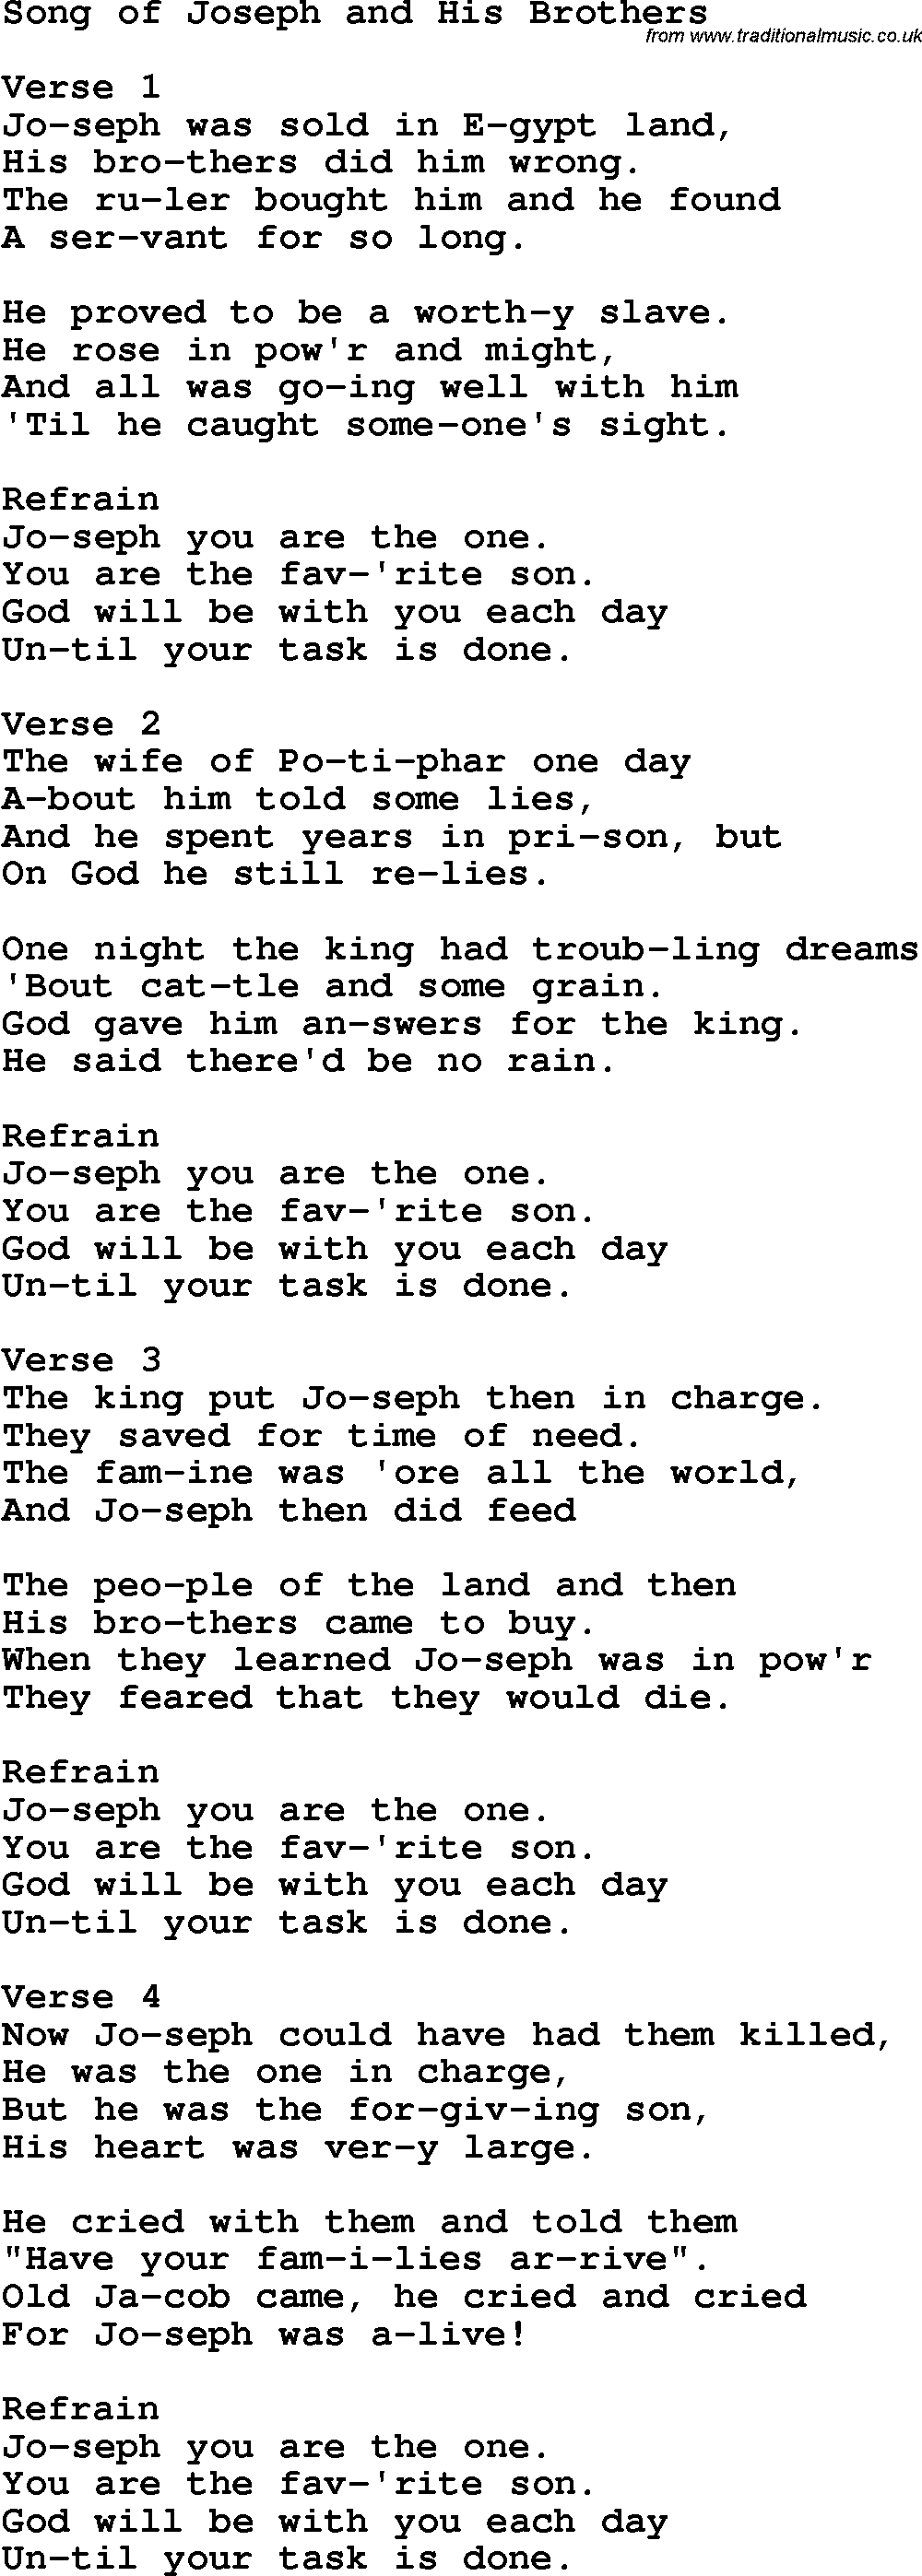 Christian Chlidrens Song Song Of Joseph And His Brothers Lyrics